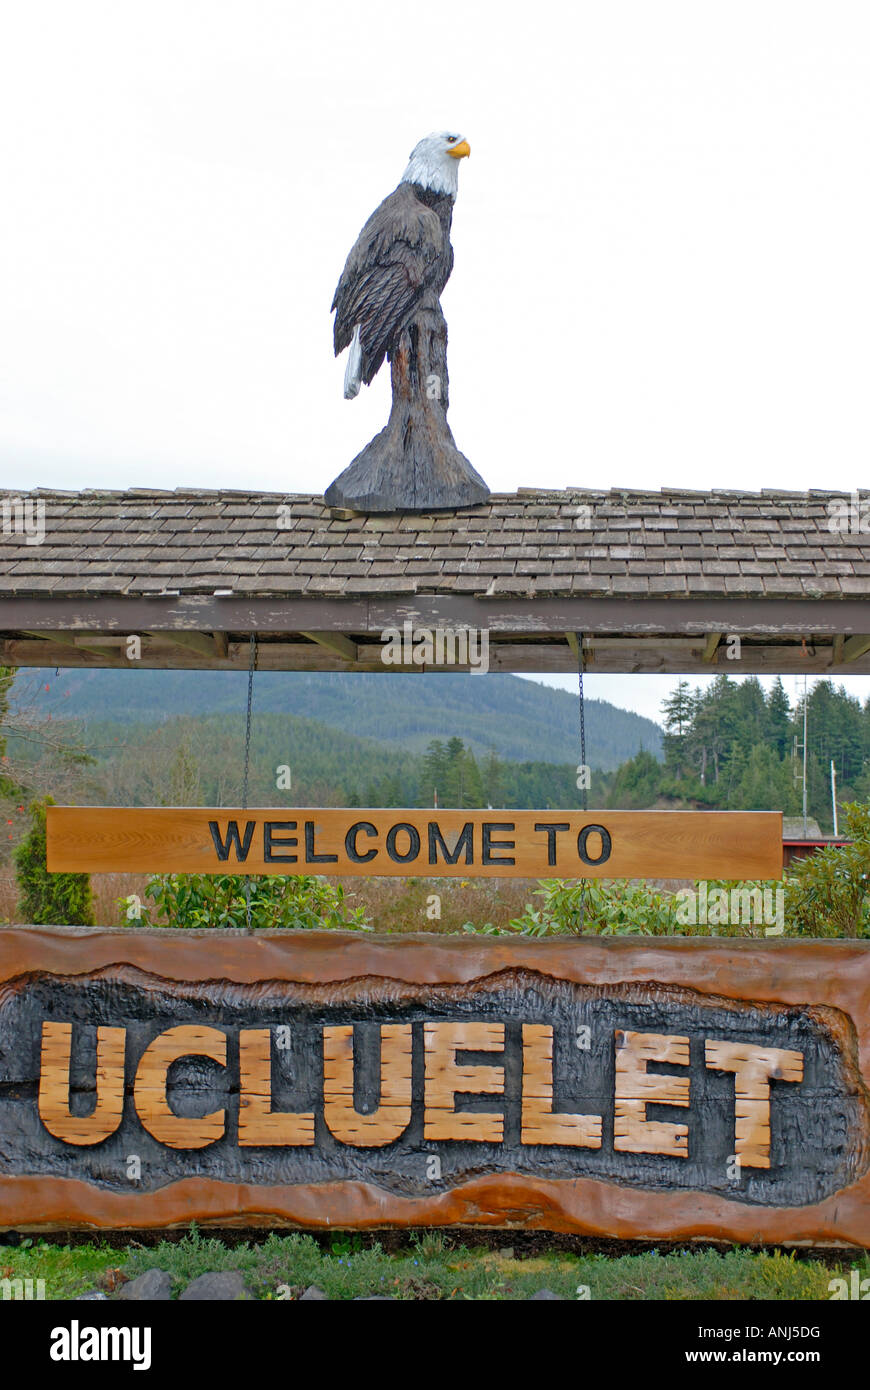 Visitors Welcome sign at the entrance to Ucluelet on the Northern tip of Vancouver Island BC Canada Stock Photo